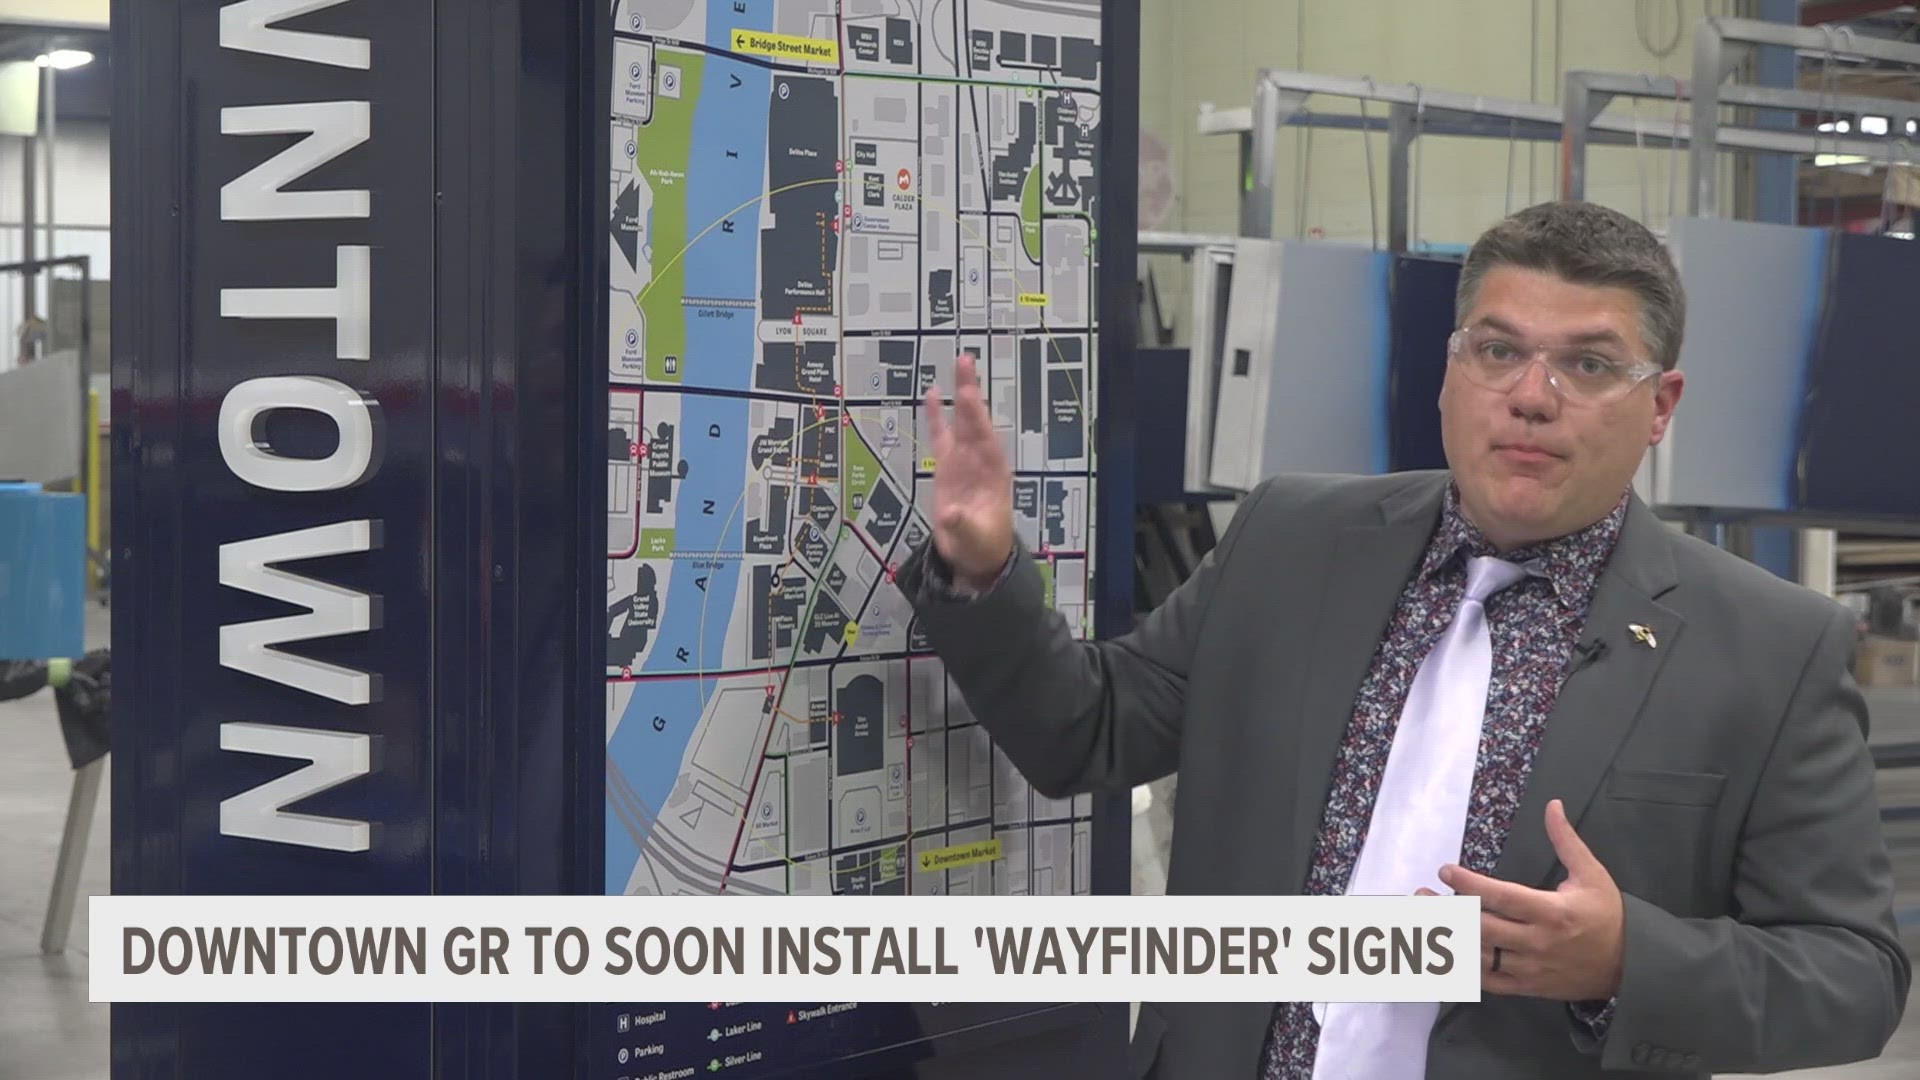 Wayfinding signs will soon be installed in the downtown area, reflecting the city's new business' and help people navigate the growing areas.